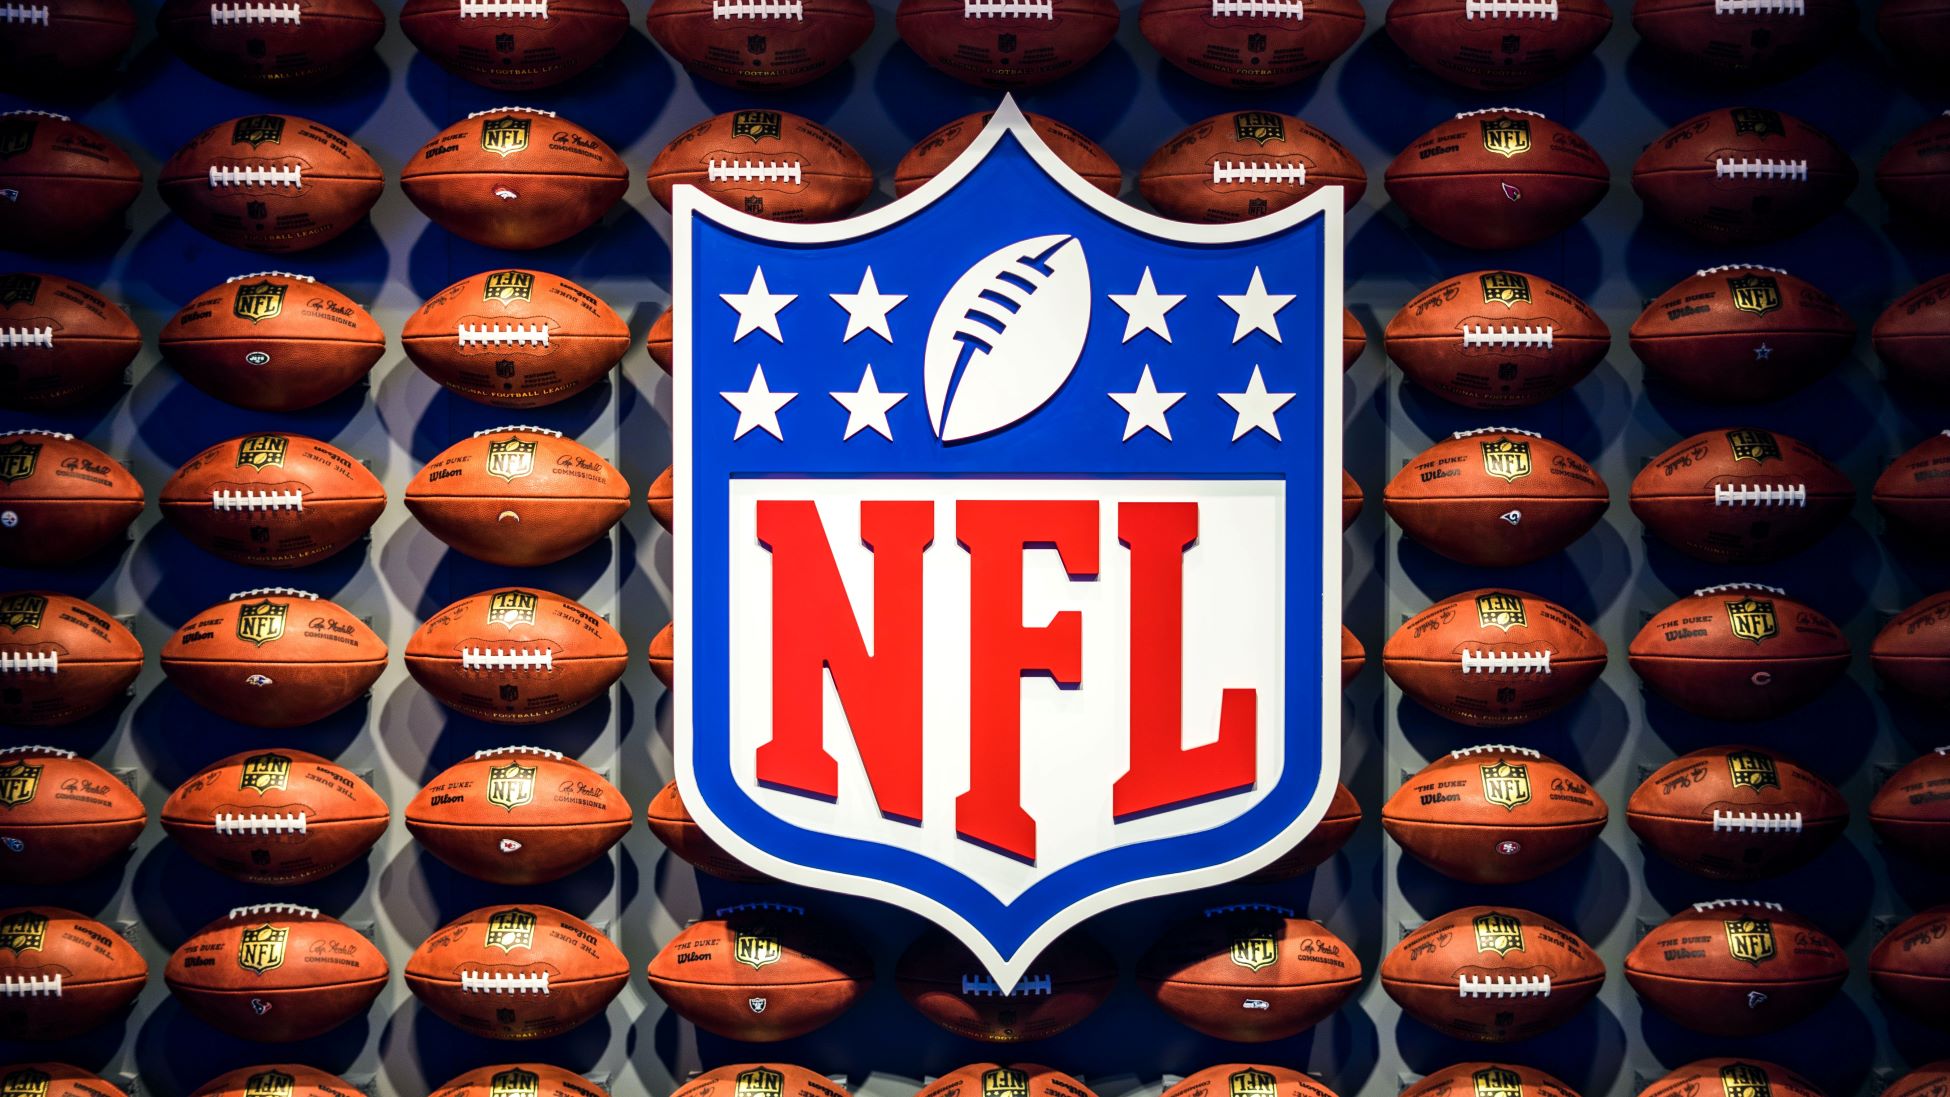 An image of the NFL logo surrounded by NFL footballs.